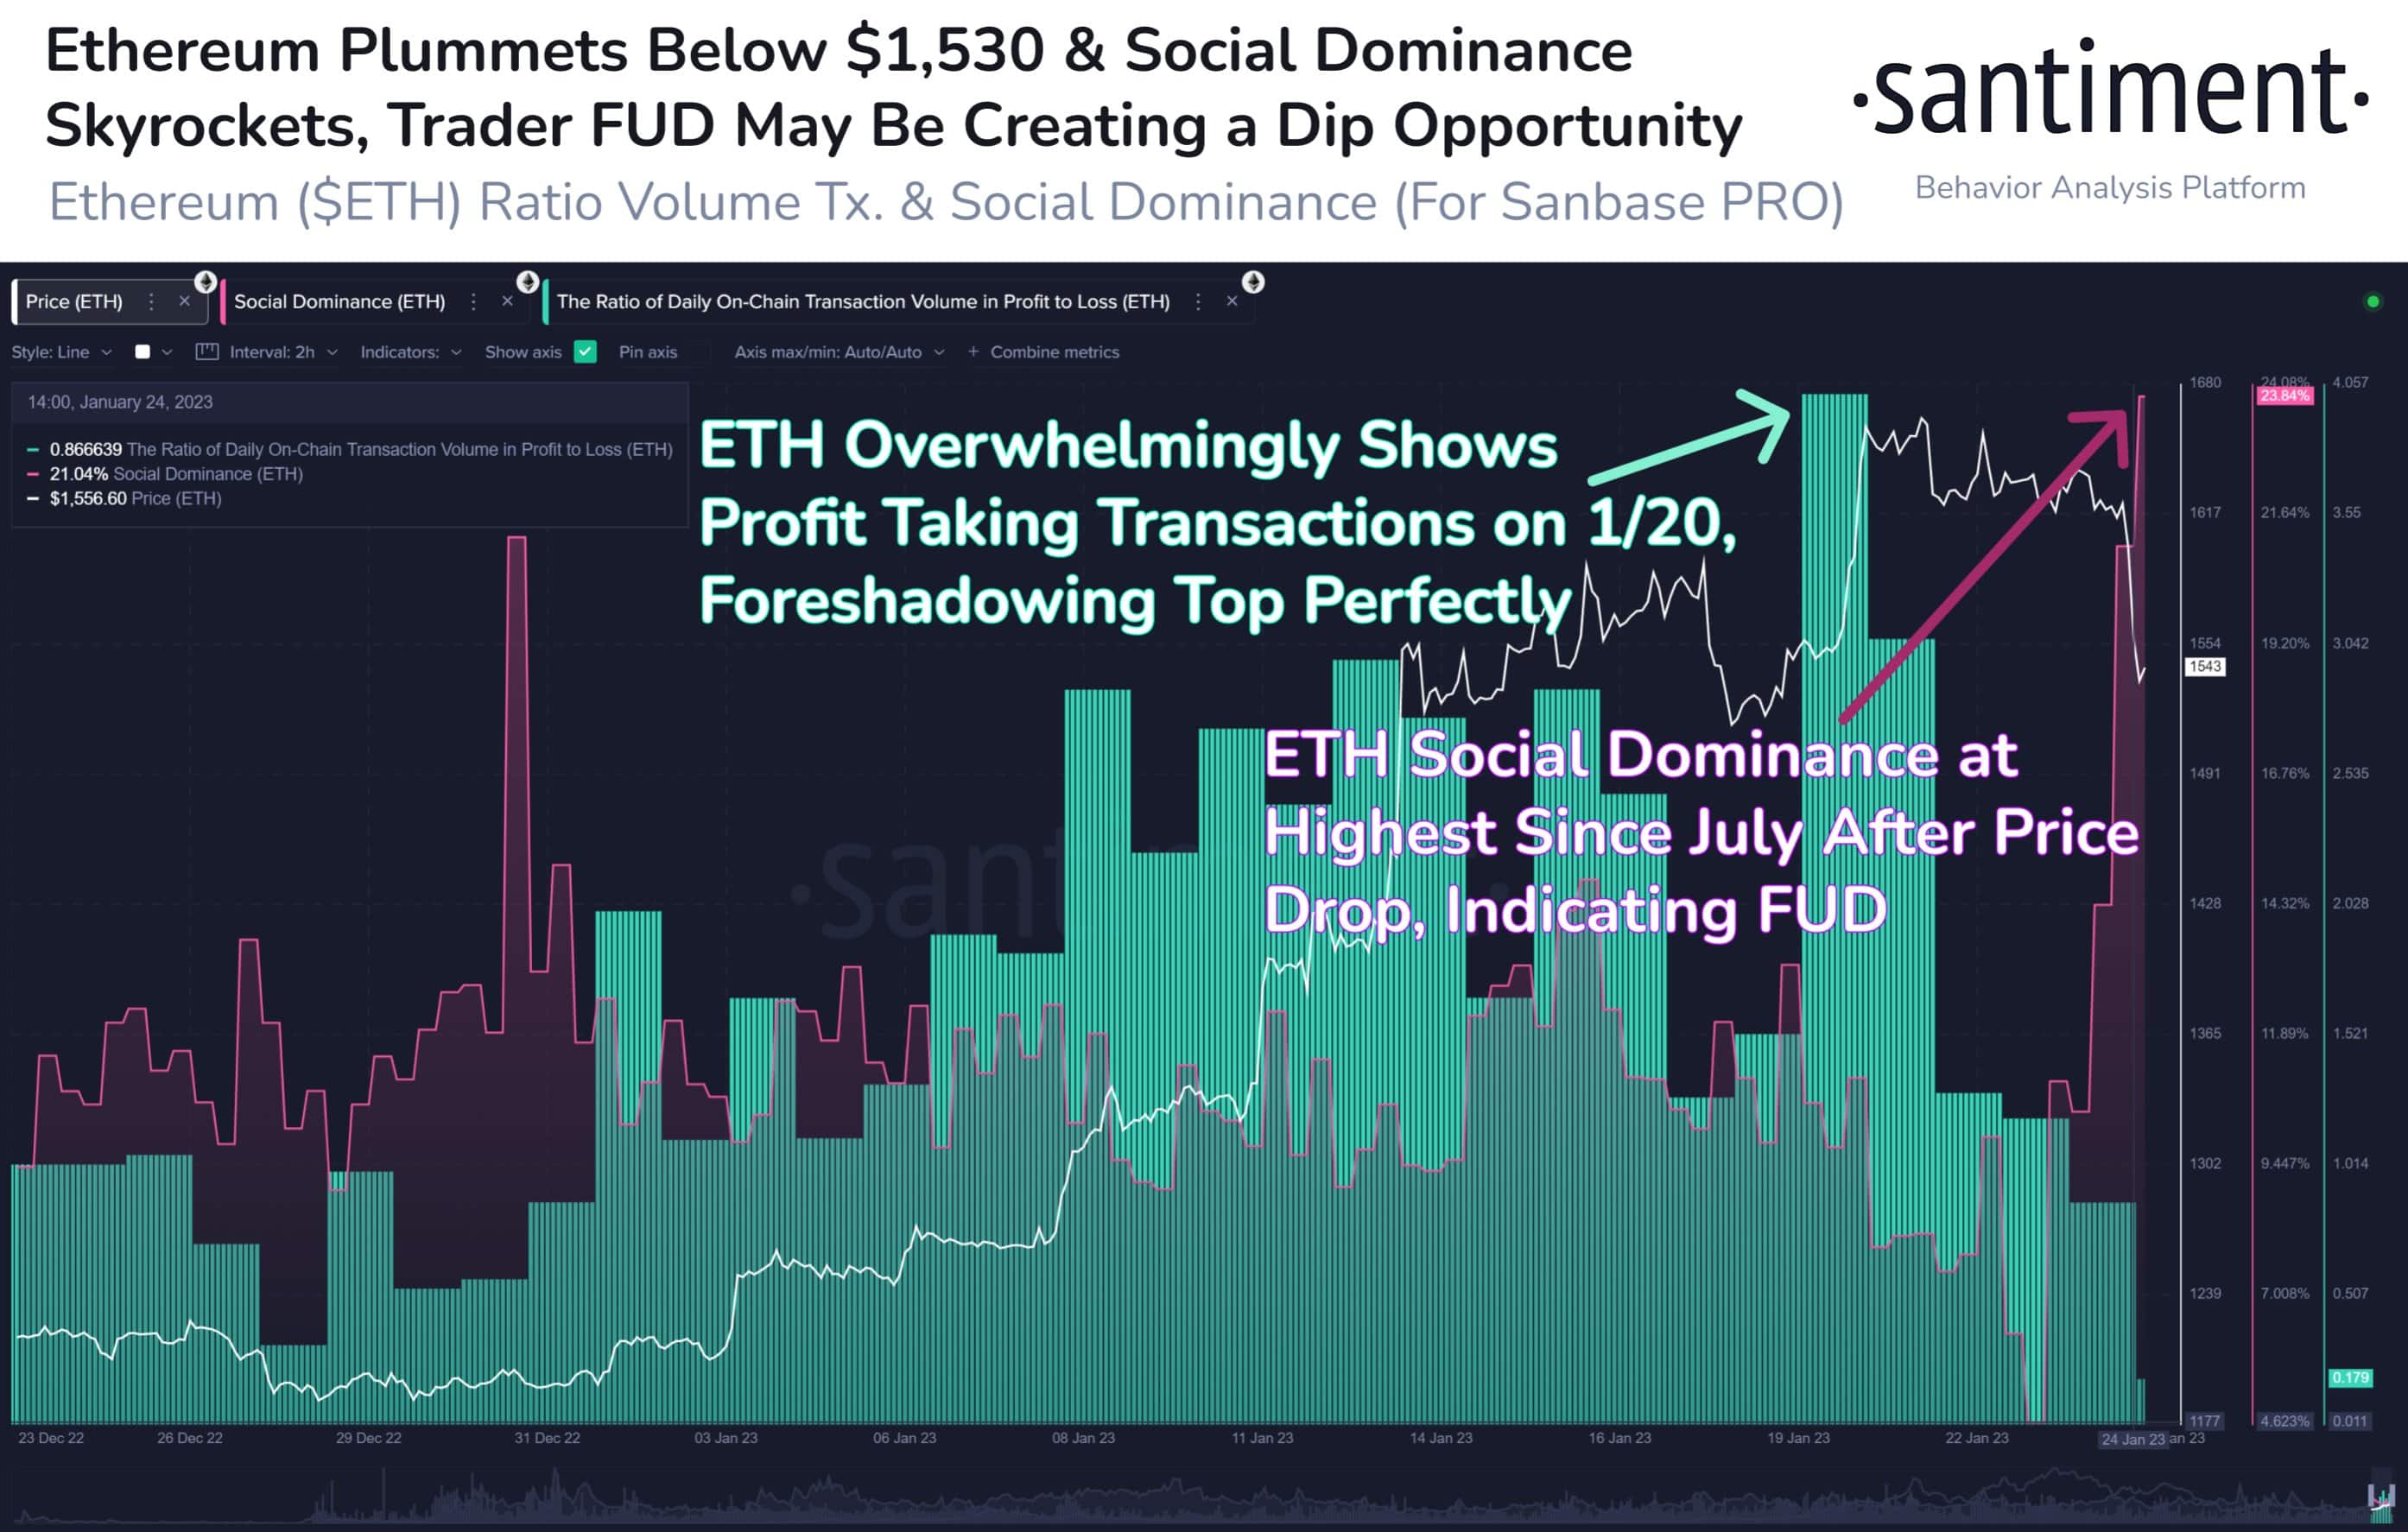 Ethereum Ratio Volume Transactions and Social Dominance